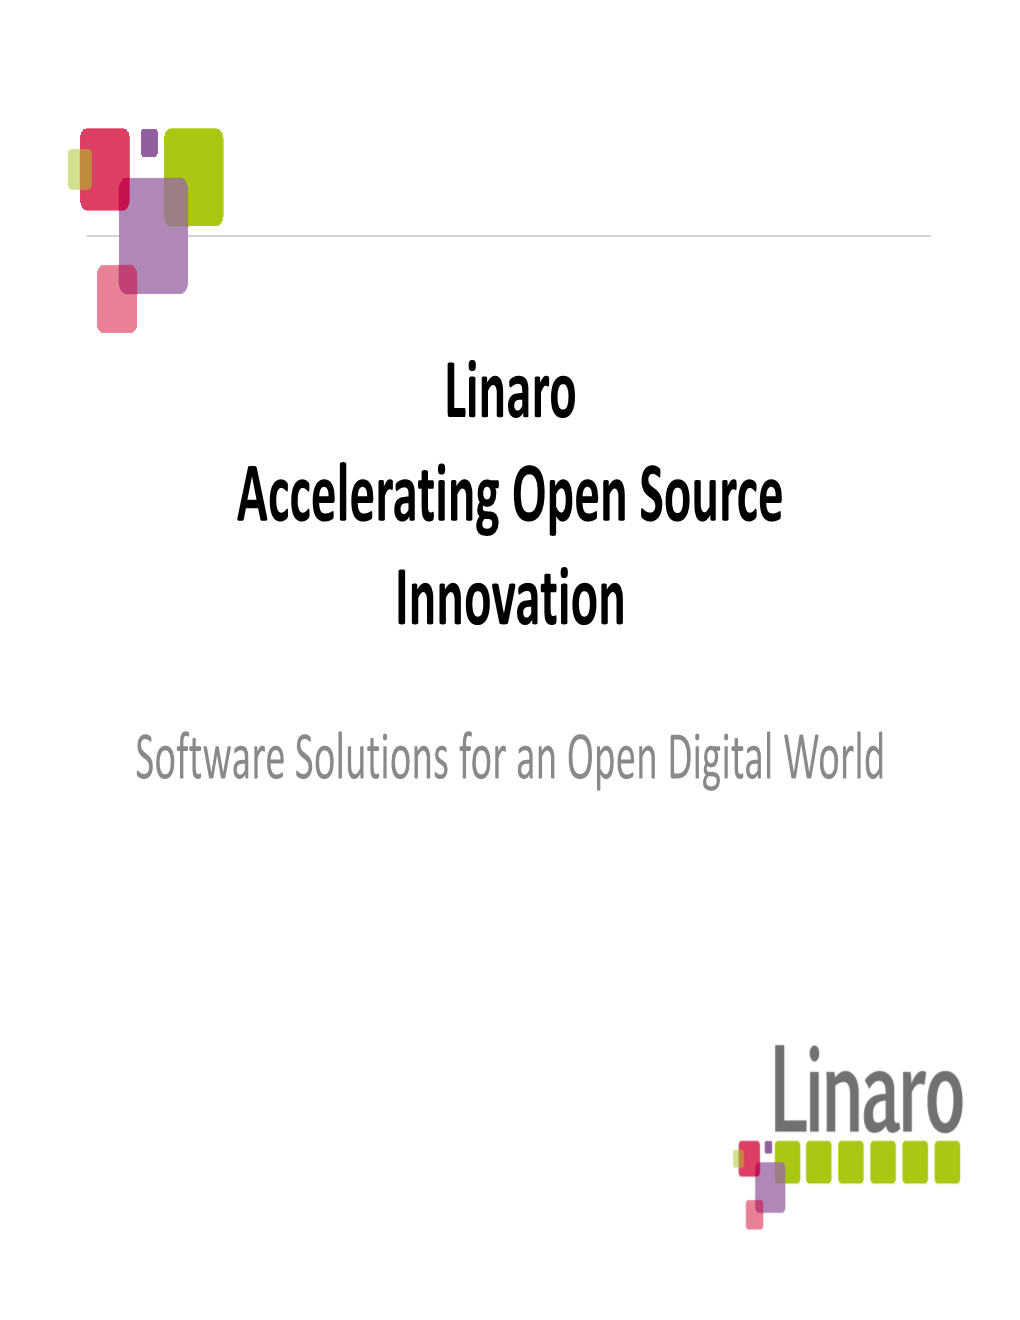 Linaro Accelerating Open Source Innovation